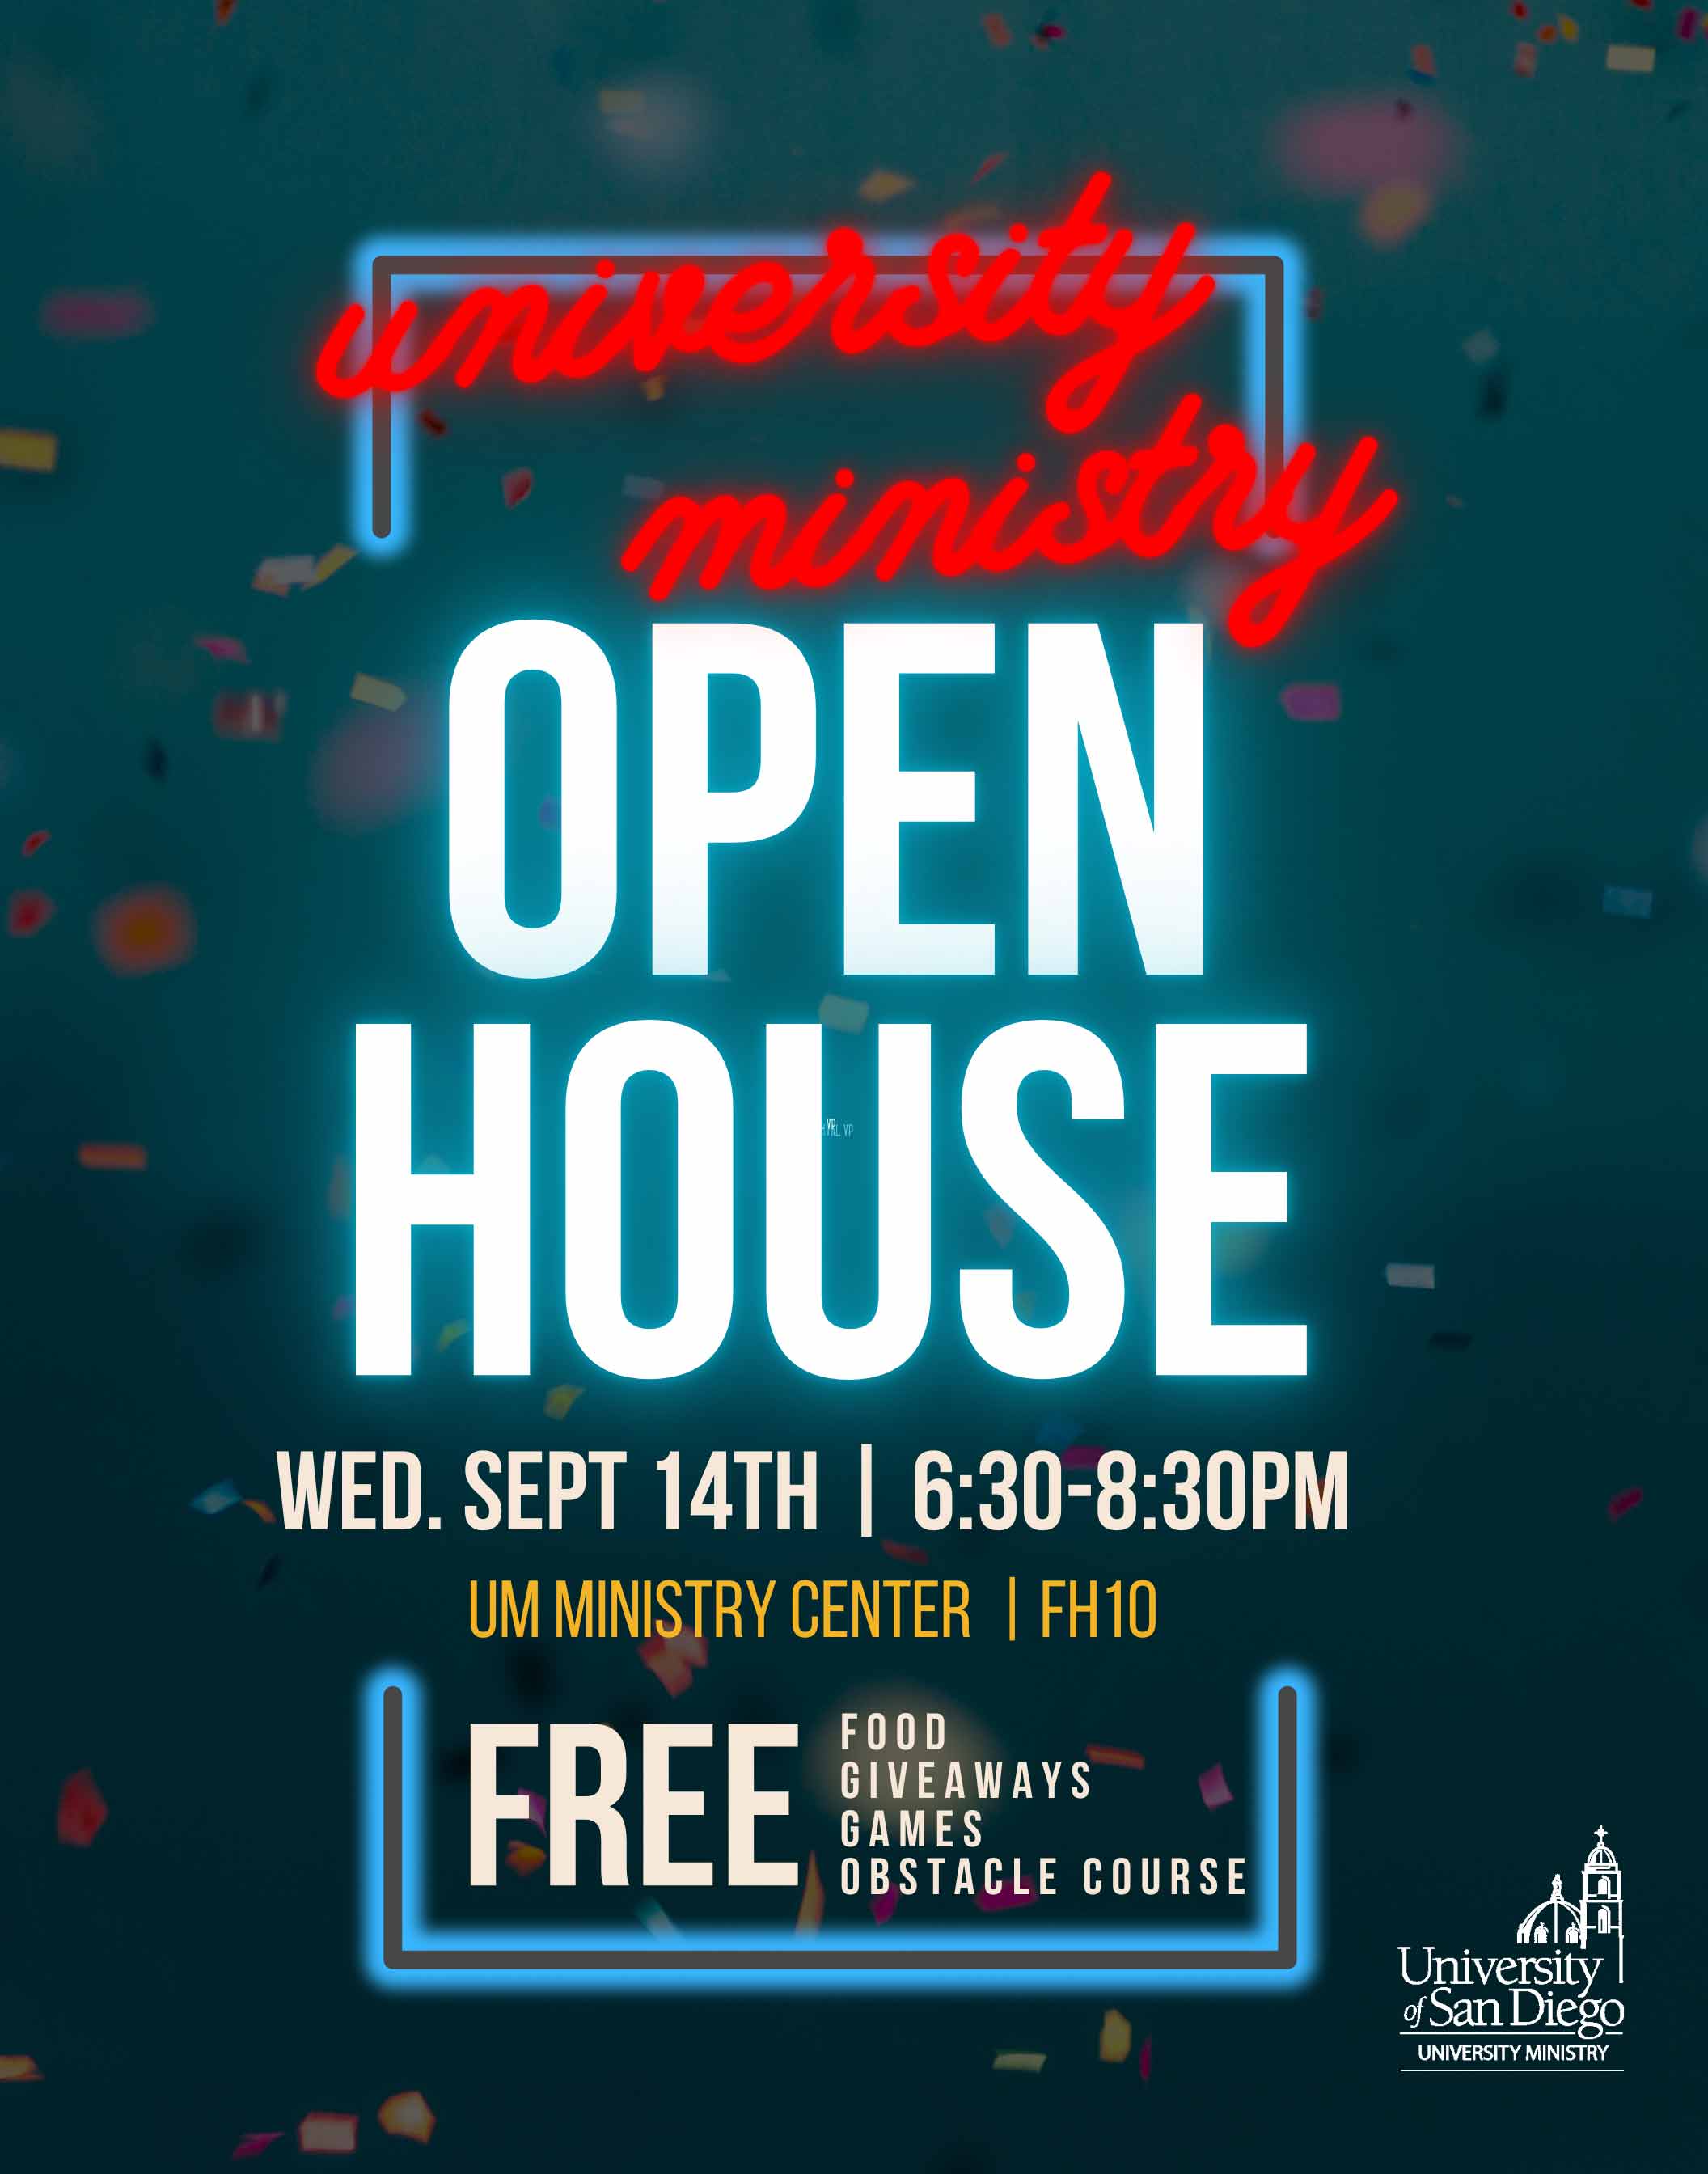 UM open house Flyer with information about our event on 9-14 at 6:30 pm